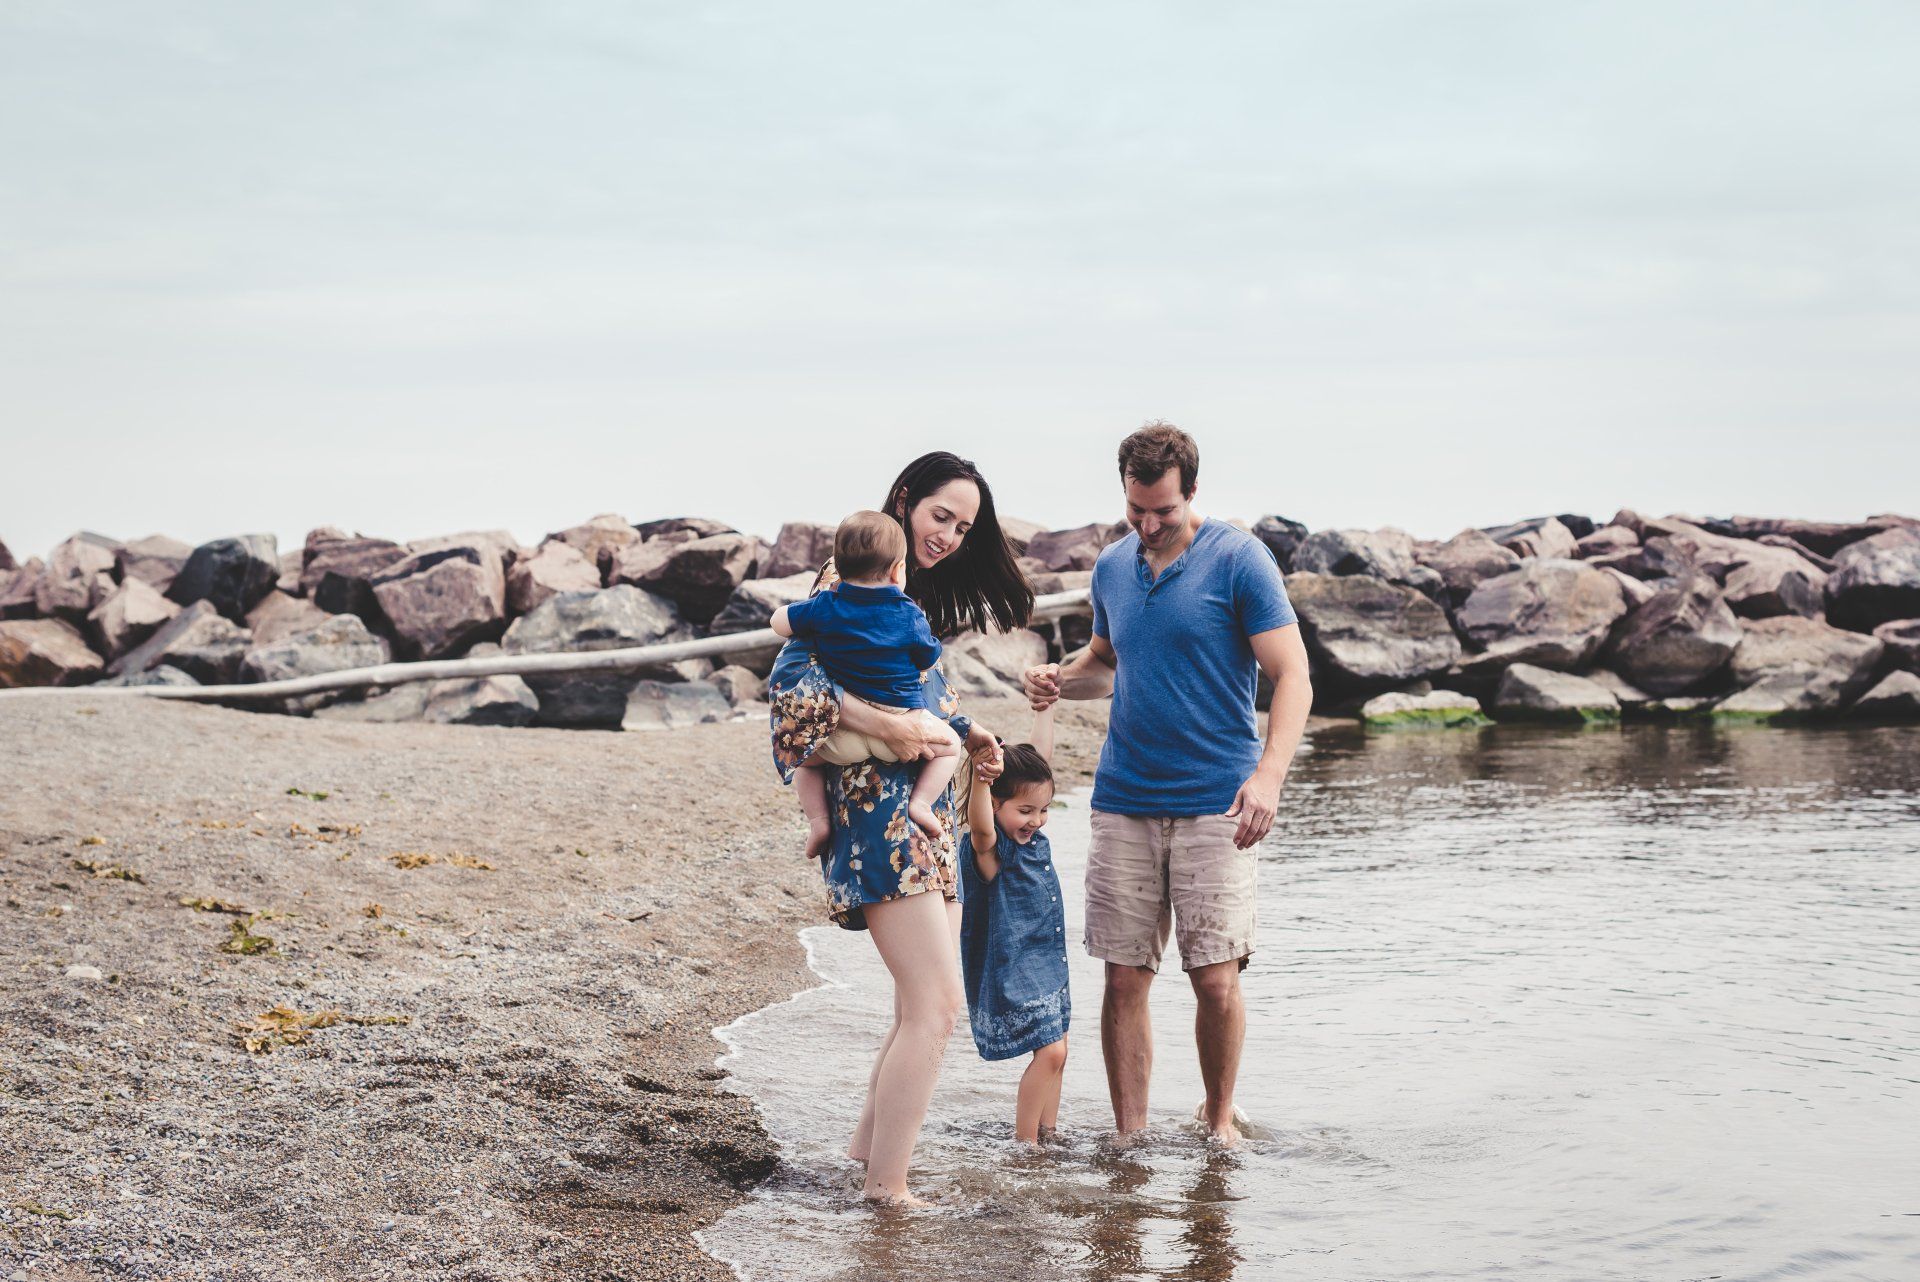 Family lifestyle photograph of a mother and father with two children standing at water's edge